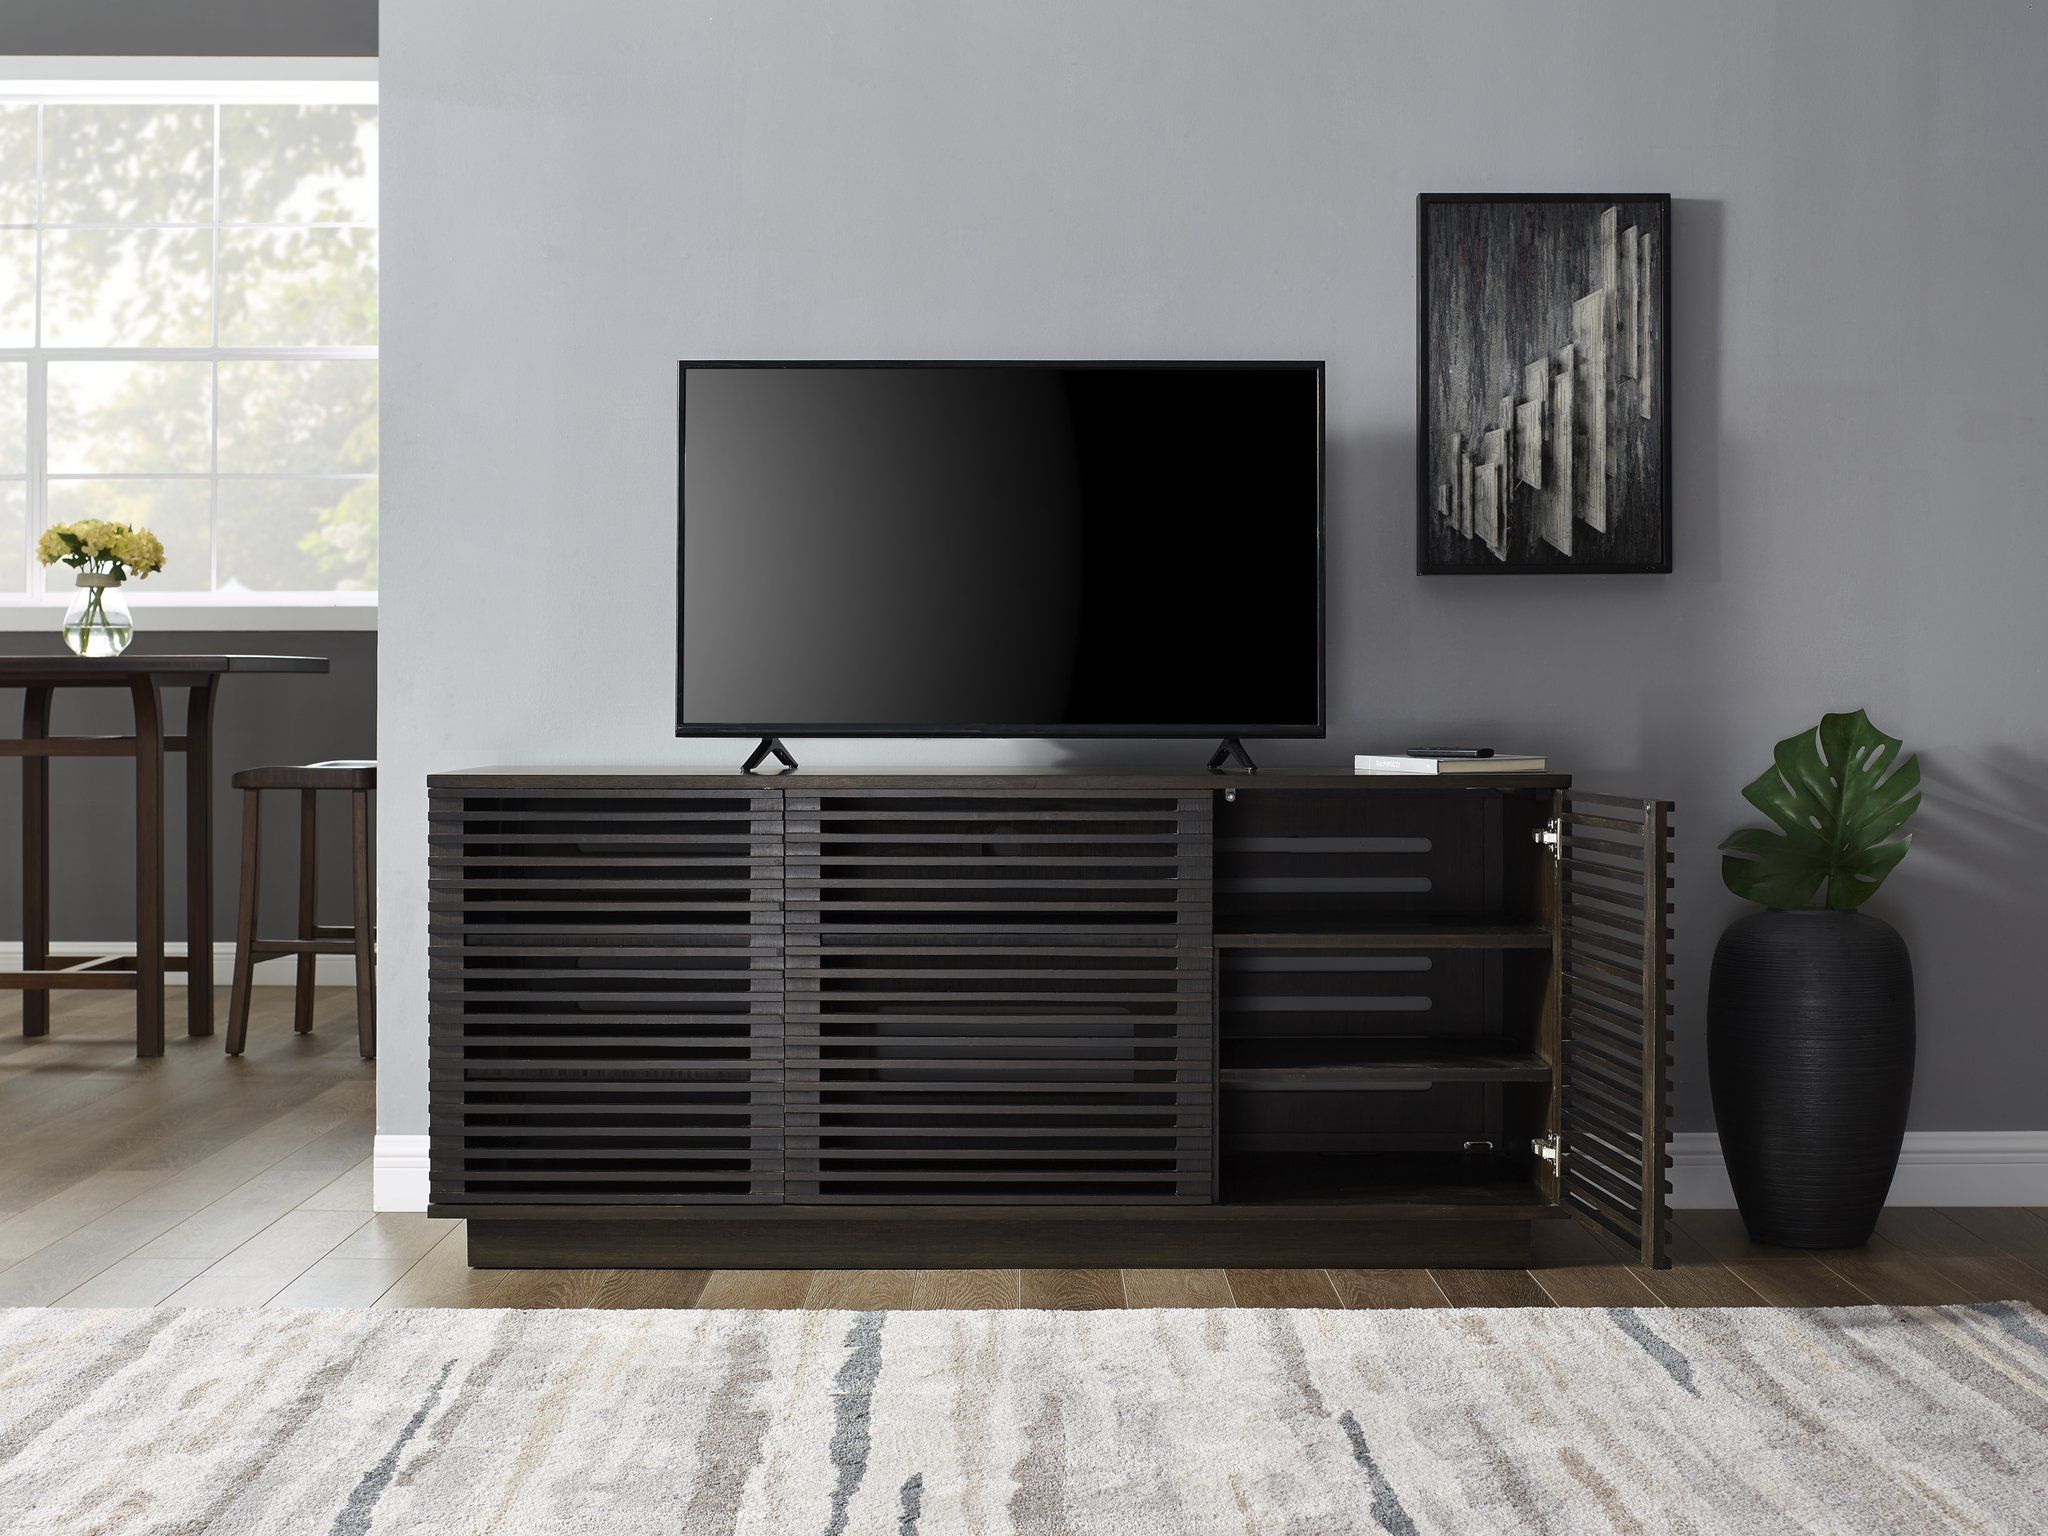 Greenington Rowan Media Center Tv Stand For Tvs Up To 60" | Wayfair With Rowan 64 Inch Tv Stands (View 1 of 30)